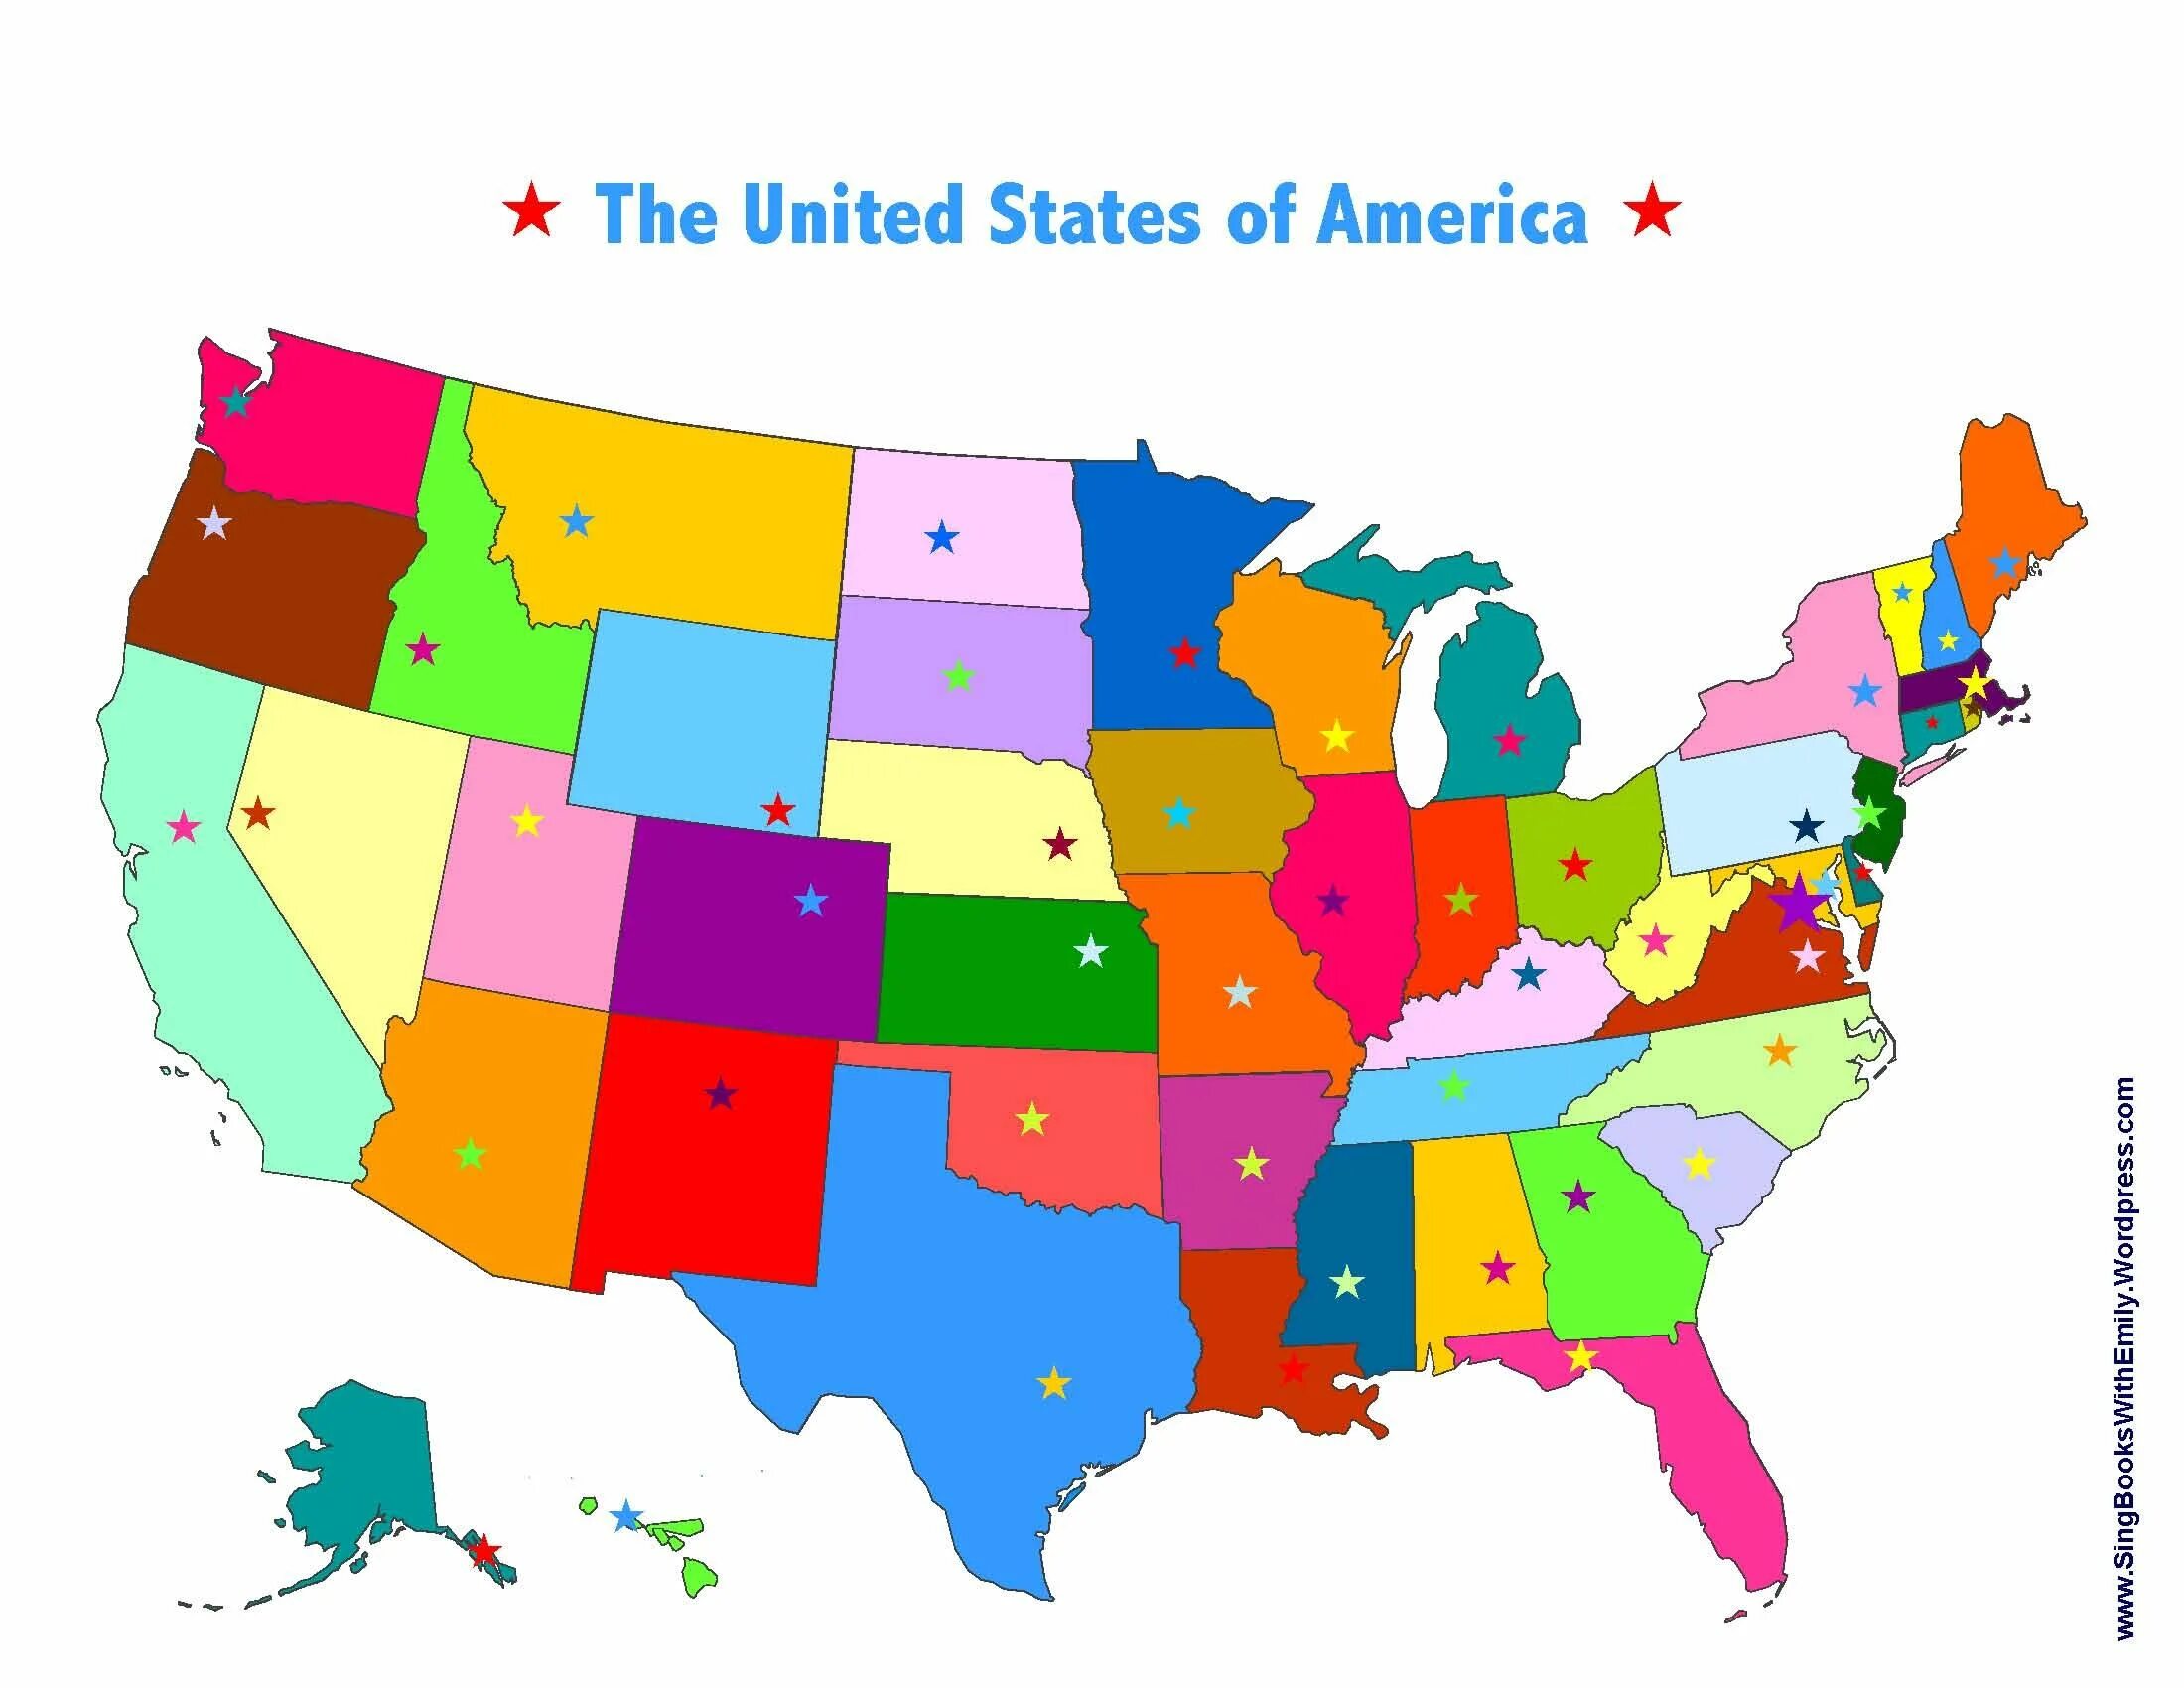 We map. The United States of America карта. USA States Map. USA 50 States. USA States and Capitals Map.